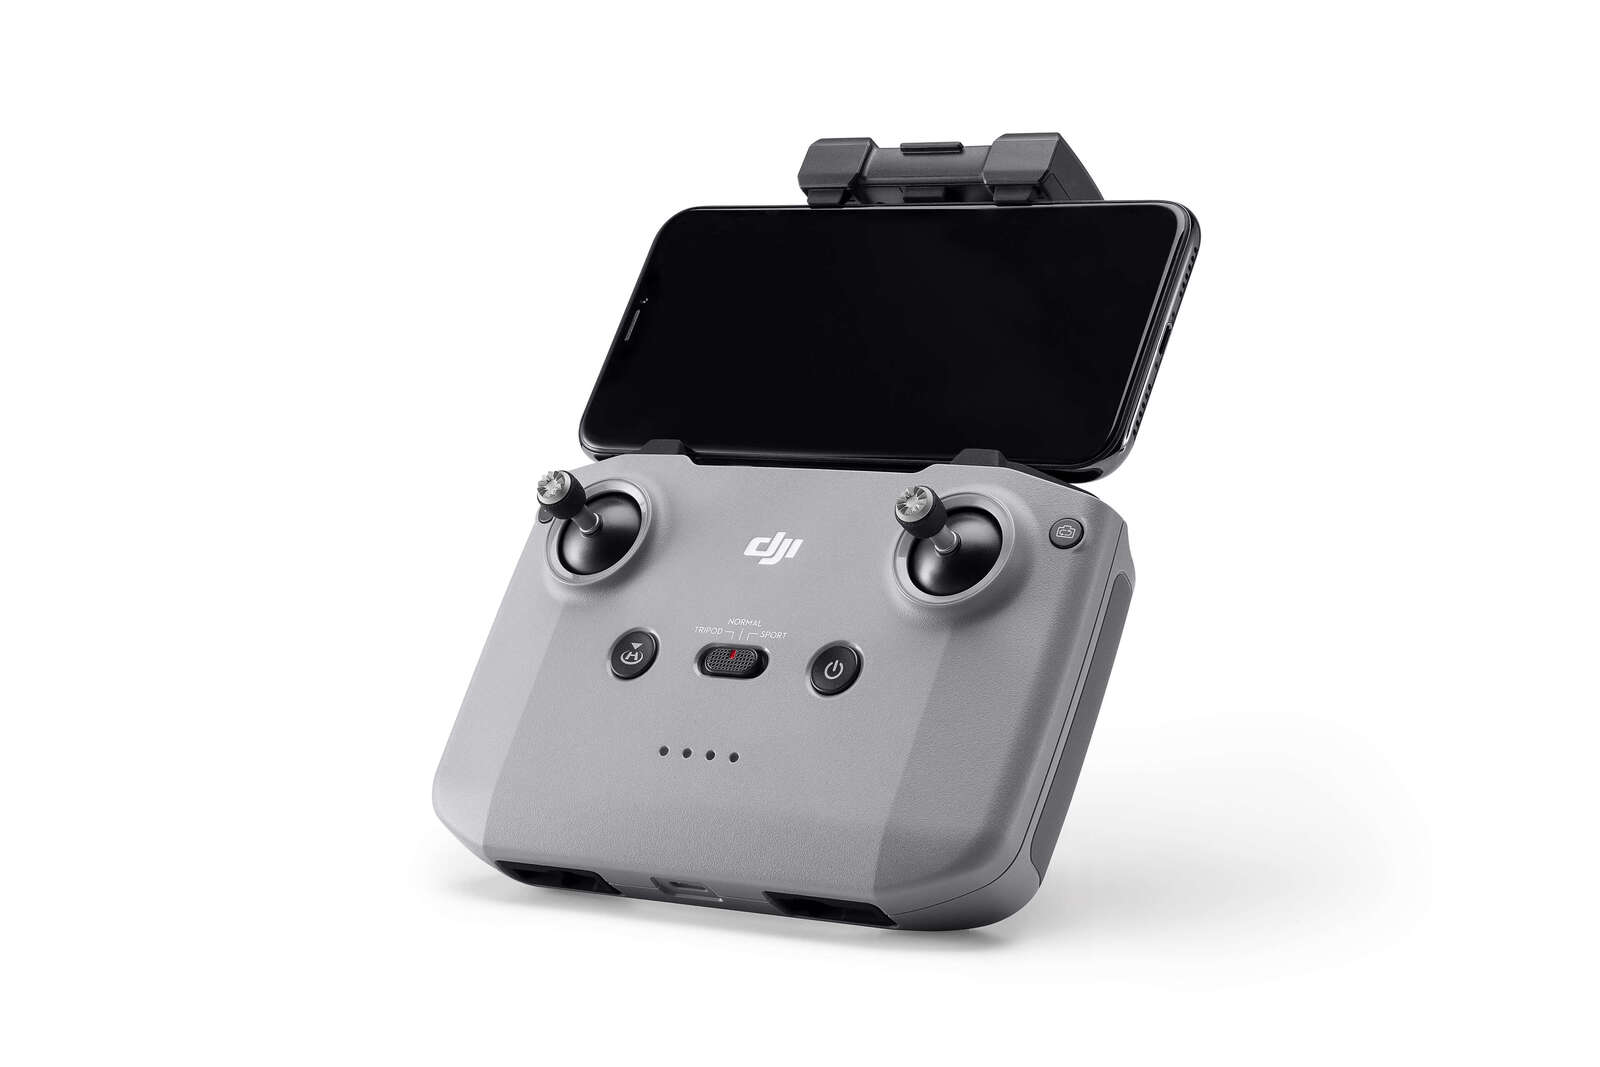 NEW DJI RC 2 Controller Review - WATCH BEFORE YOU BUY